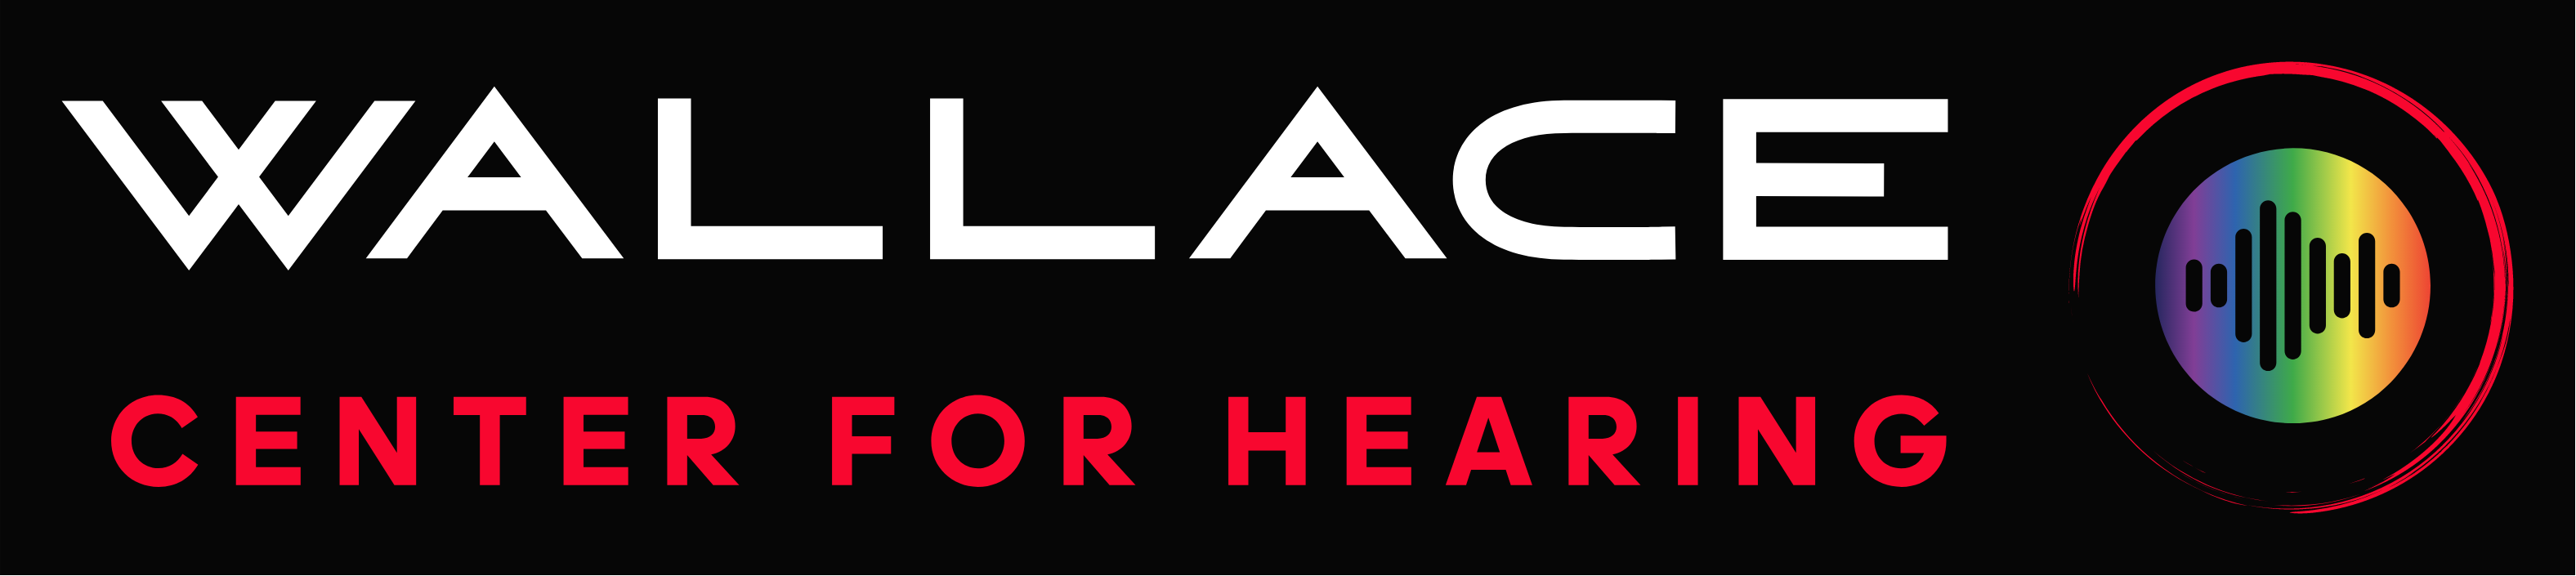 Wallace Center For Hearing Logo with black background